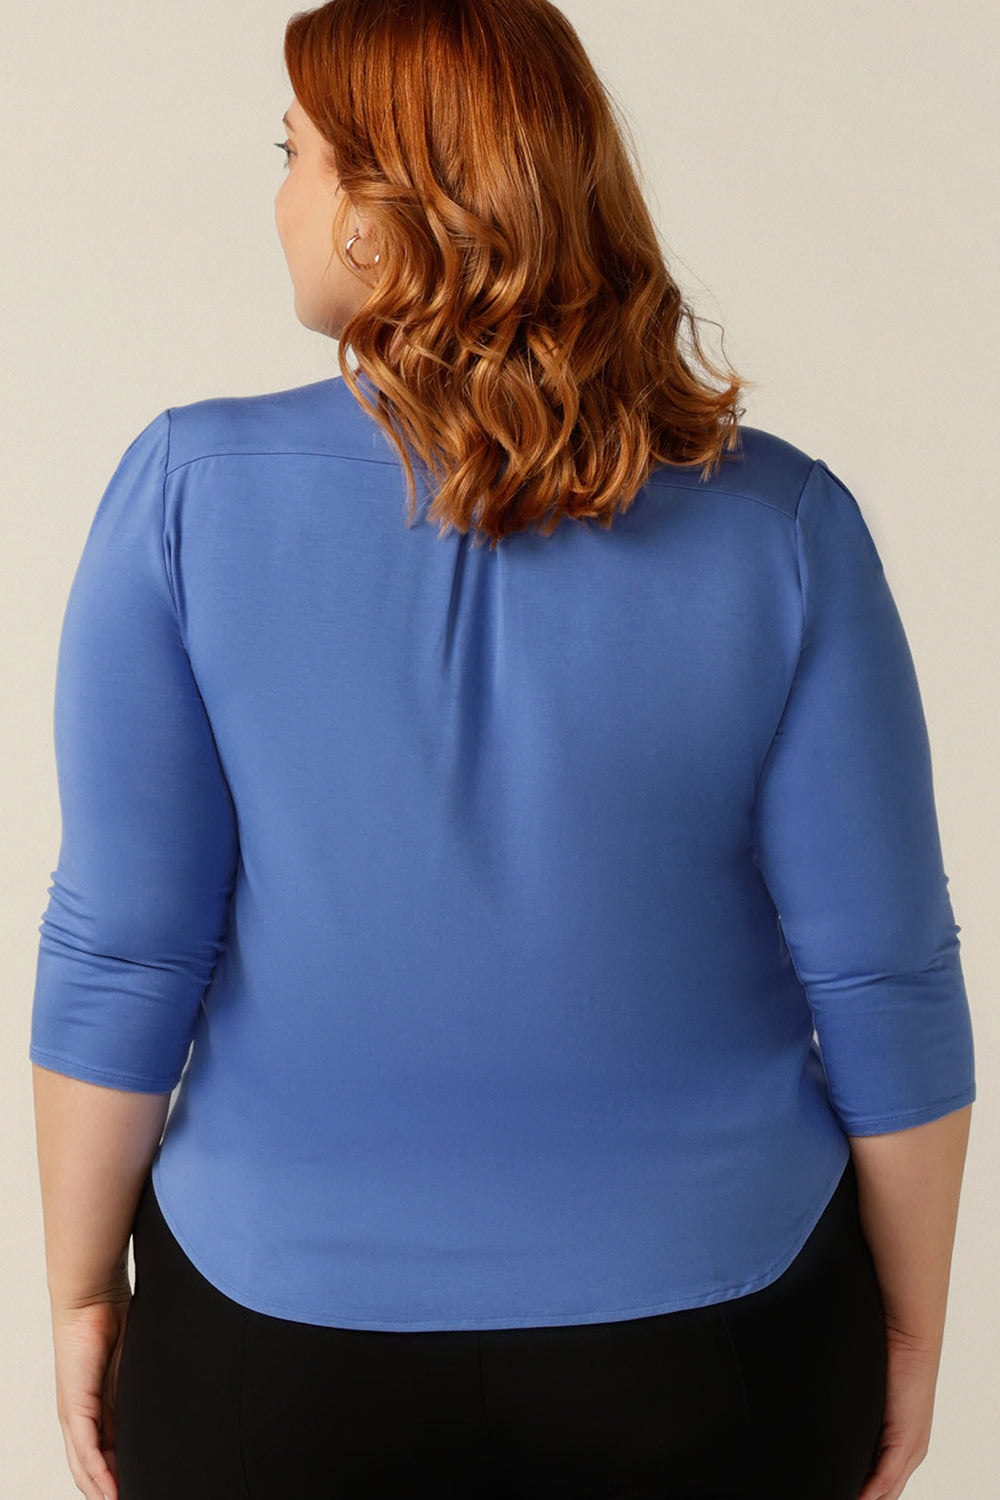 A plus size, size 18 woman wears a blue bamboo jersey top. The top has a round neckline, 3/4 sleeves, and a curved shirttail hemline. Made in bamboo jersey, this top is made from sustainable, natural fibres that are lightweight and breathable and part of the movement towards eco-conscious fashion.